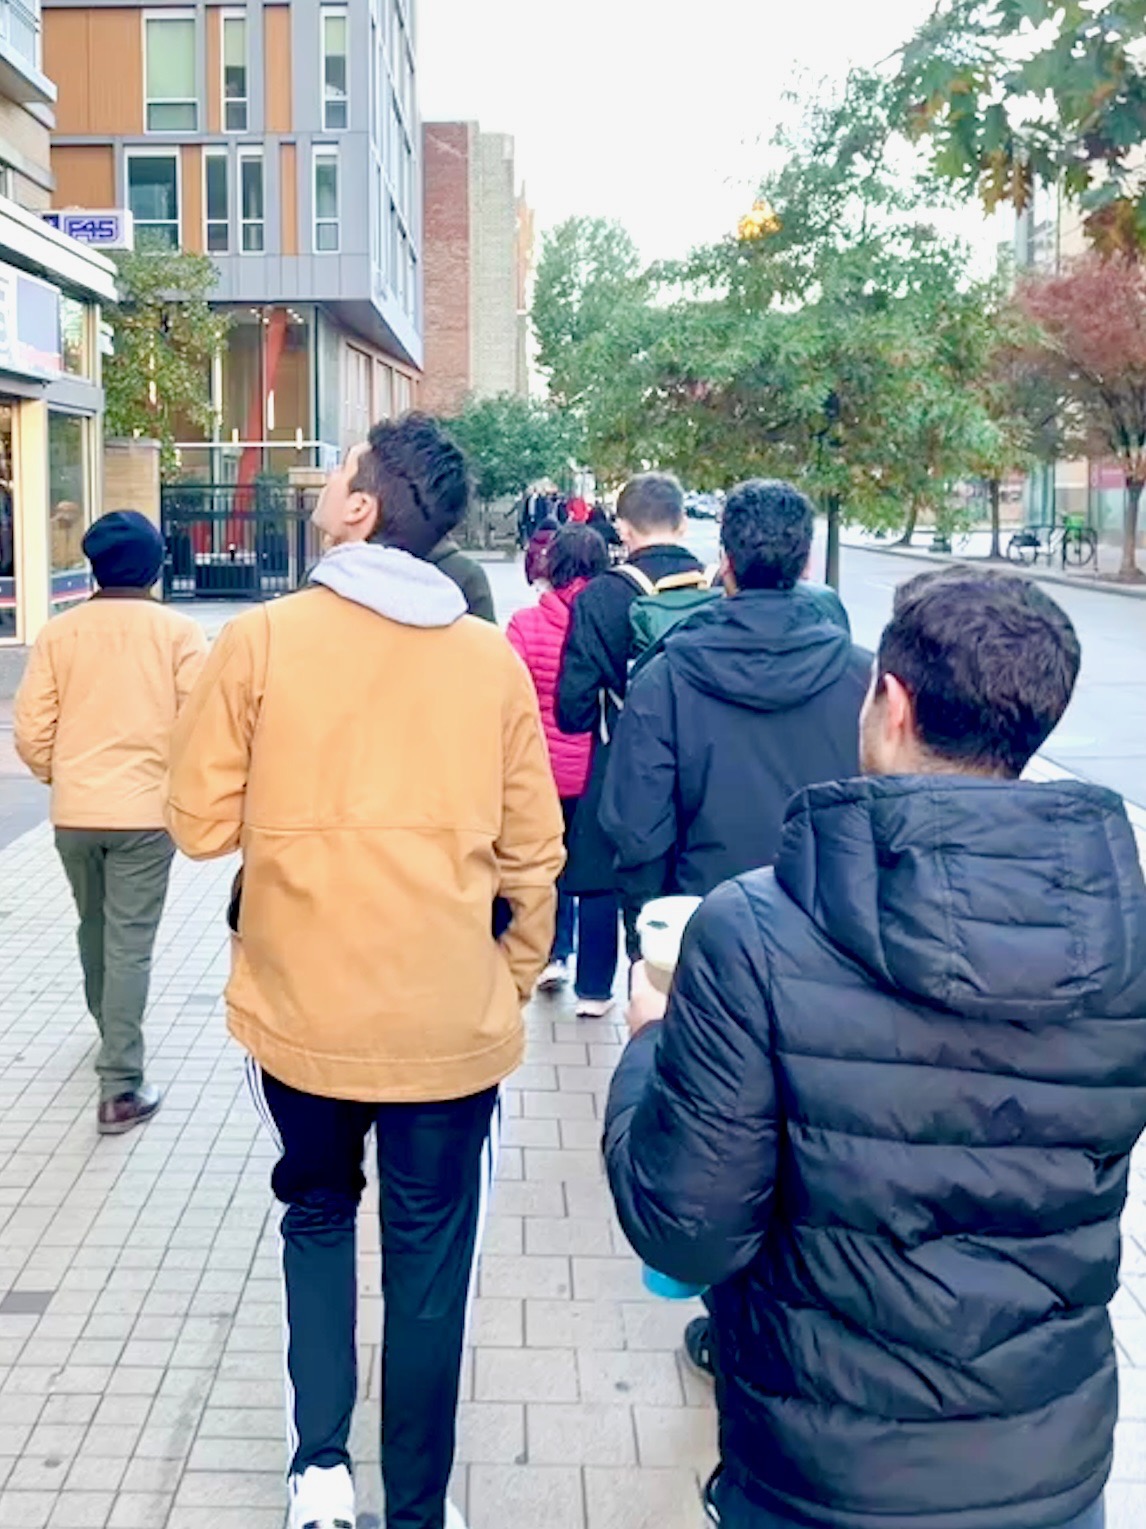 A group of residents, wearing coats on a chilly day, walk down a sidewalk away from the camera. One man is looking left toward a building.